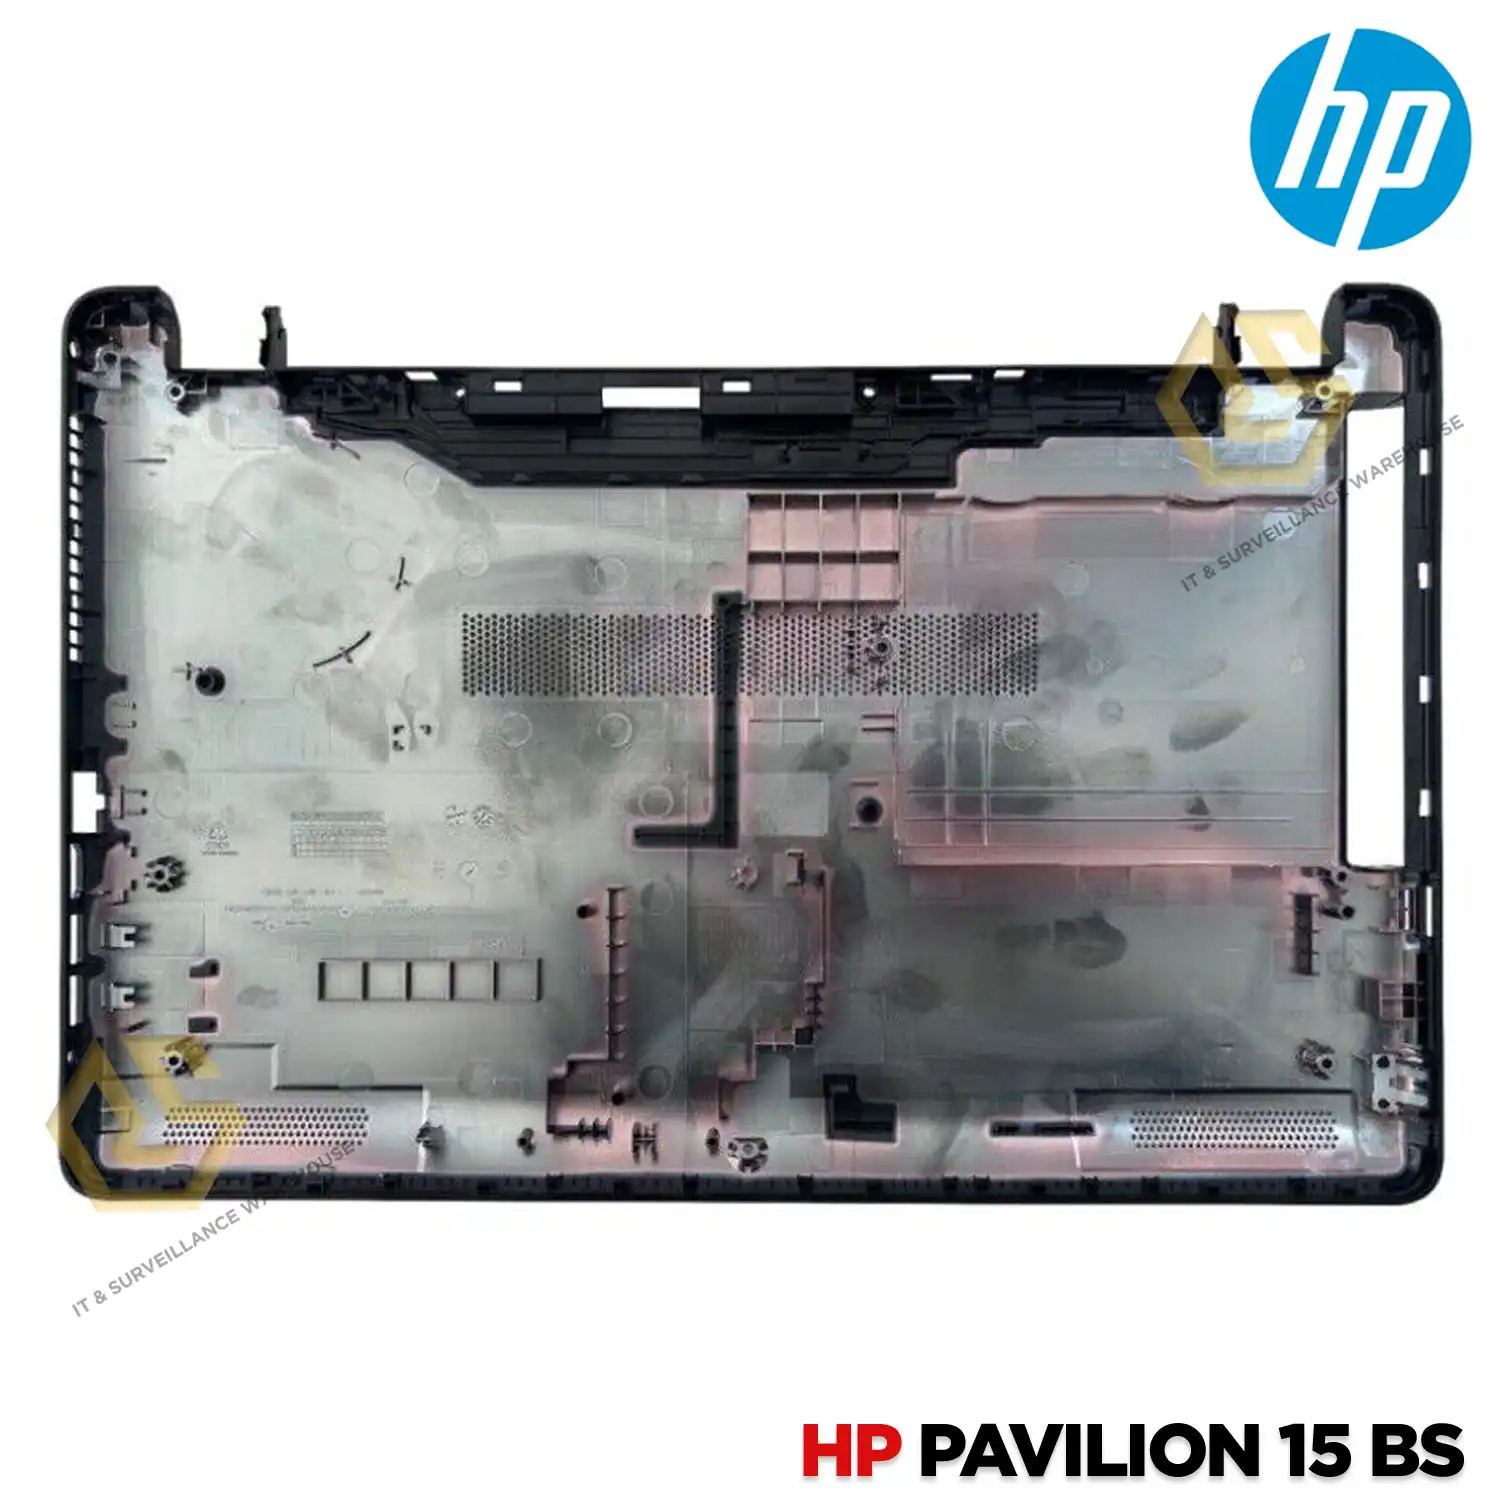 LAPTOP BASE FOR HP 15BS